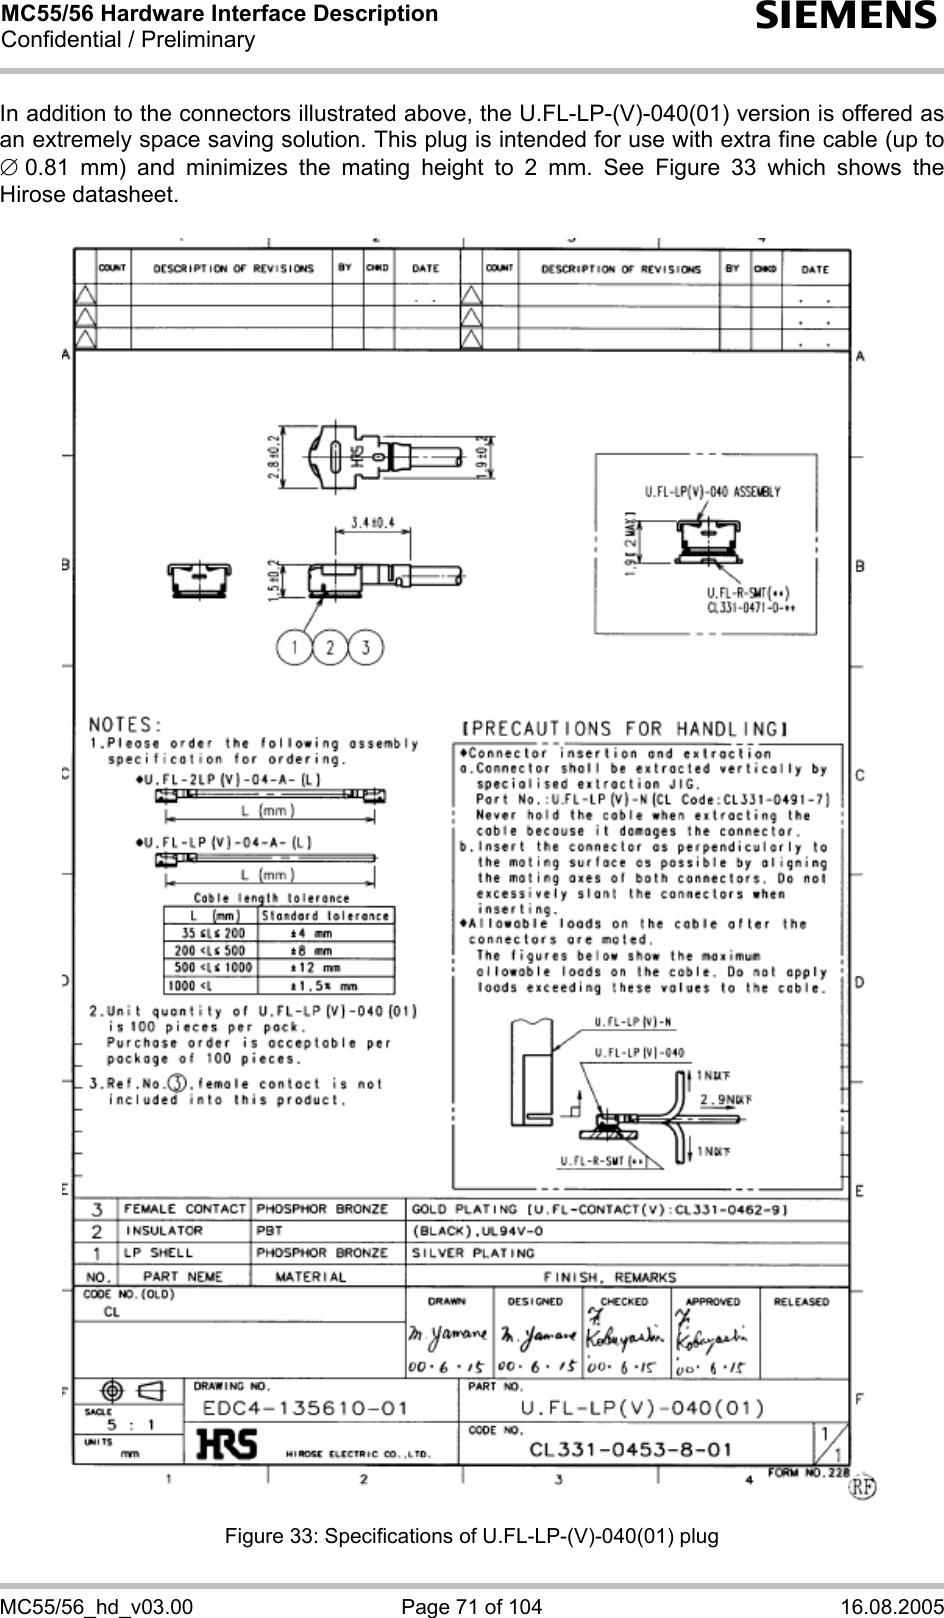 MC55/56 Hardware Interface Description Confidential / Preliminary s MC55/56_hd_v03.00  Page 71 of 104  16.08.2005 In addition to the connectors illustrated above, the U.FL-LP-(V)-040(01) version is offered as an extremely space saving solution. This plug is intended for use with extra fine cable (up to ∅ 0.81 mm) and minimizes the mating height to 2 mm. See Figure 33 which shows the Hirose datasheet.    Figure 33: Specifications of U.FL-LP-(V)-040(01) plug 